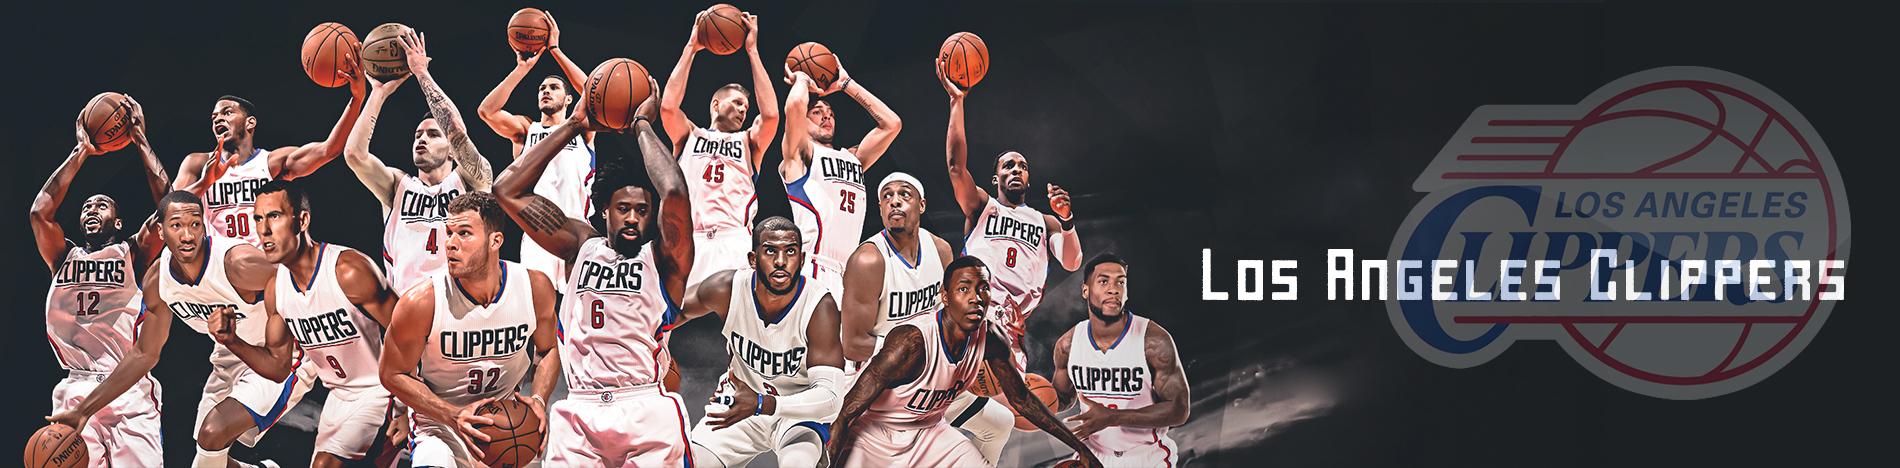 Boutique Maillot Los Angeles Clippers